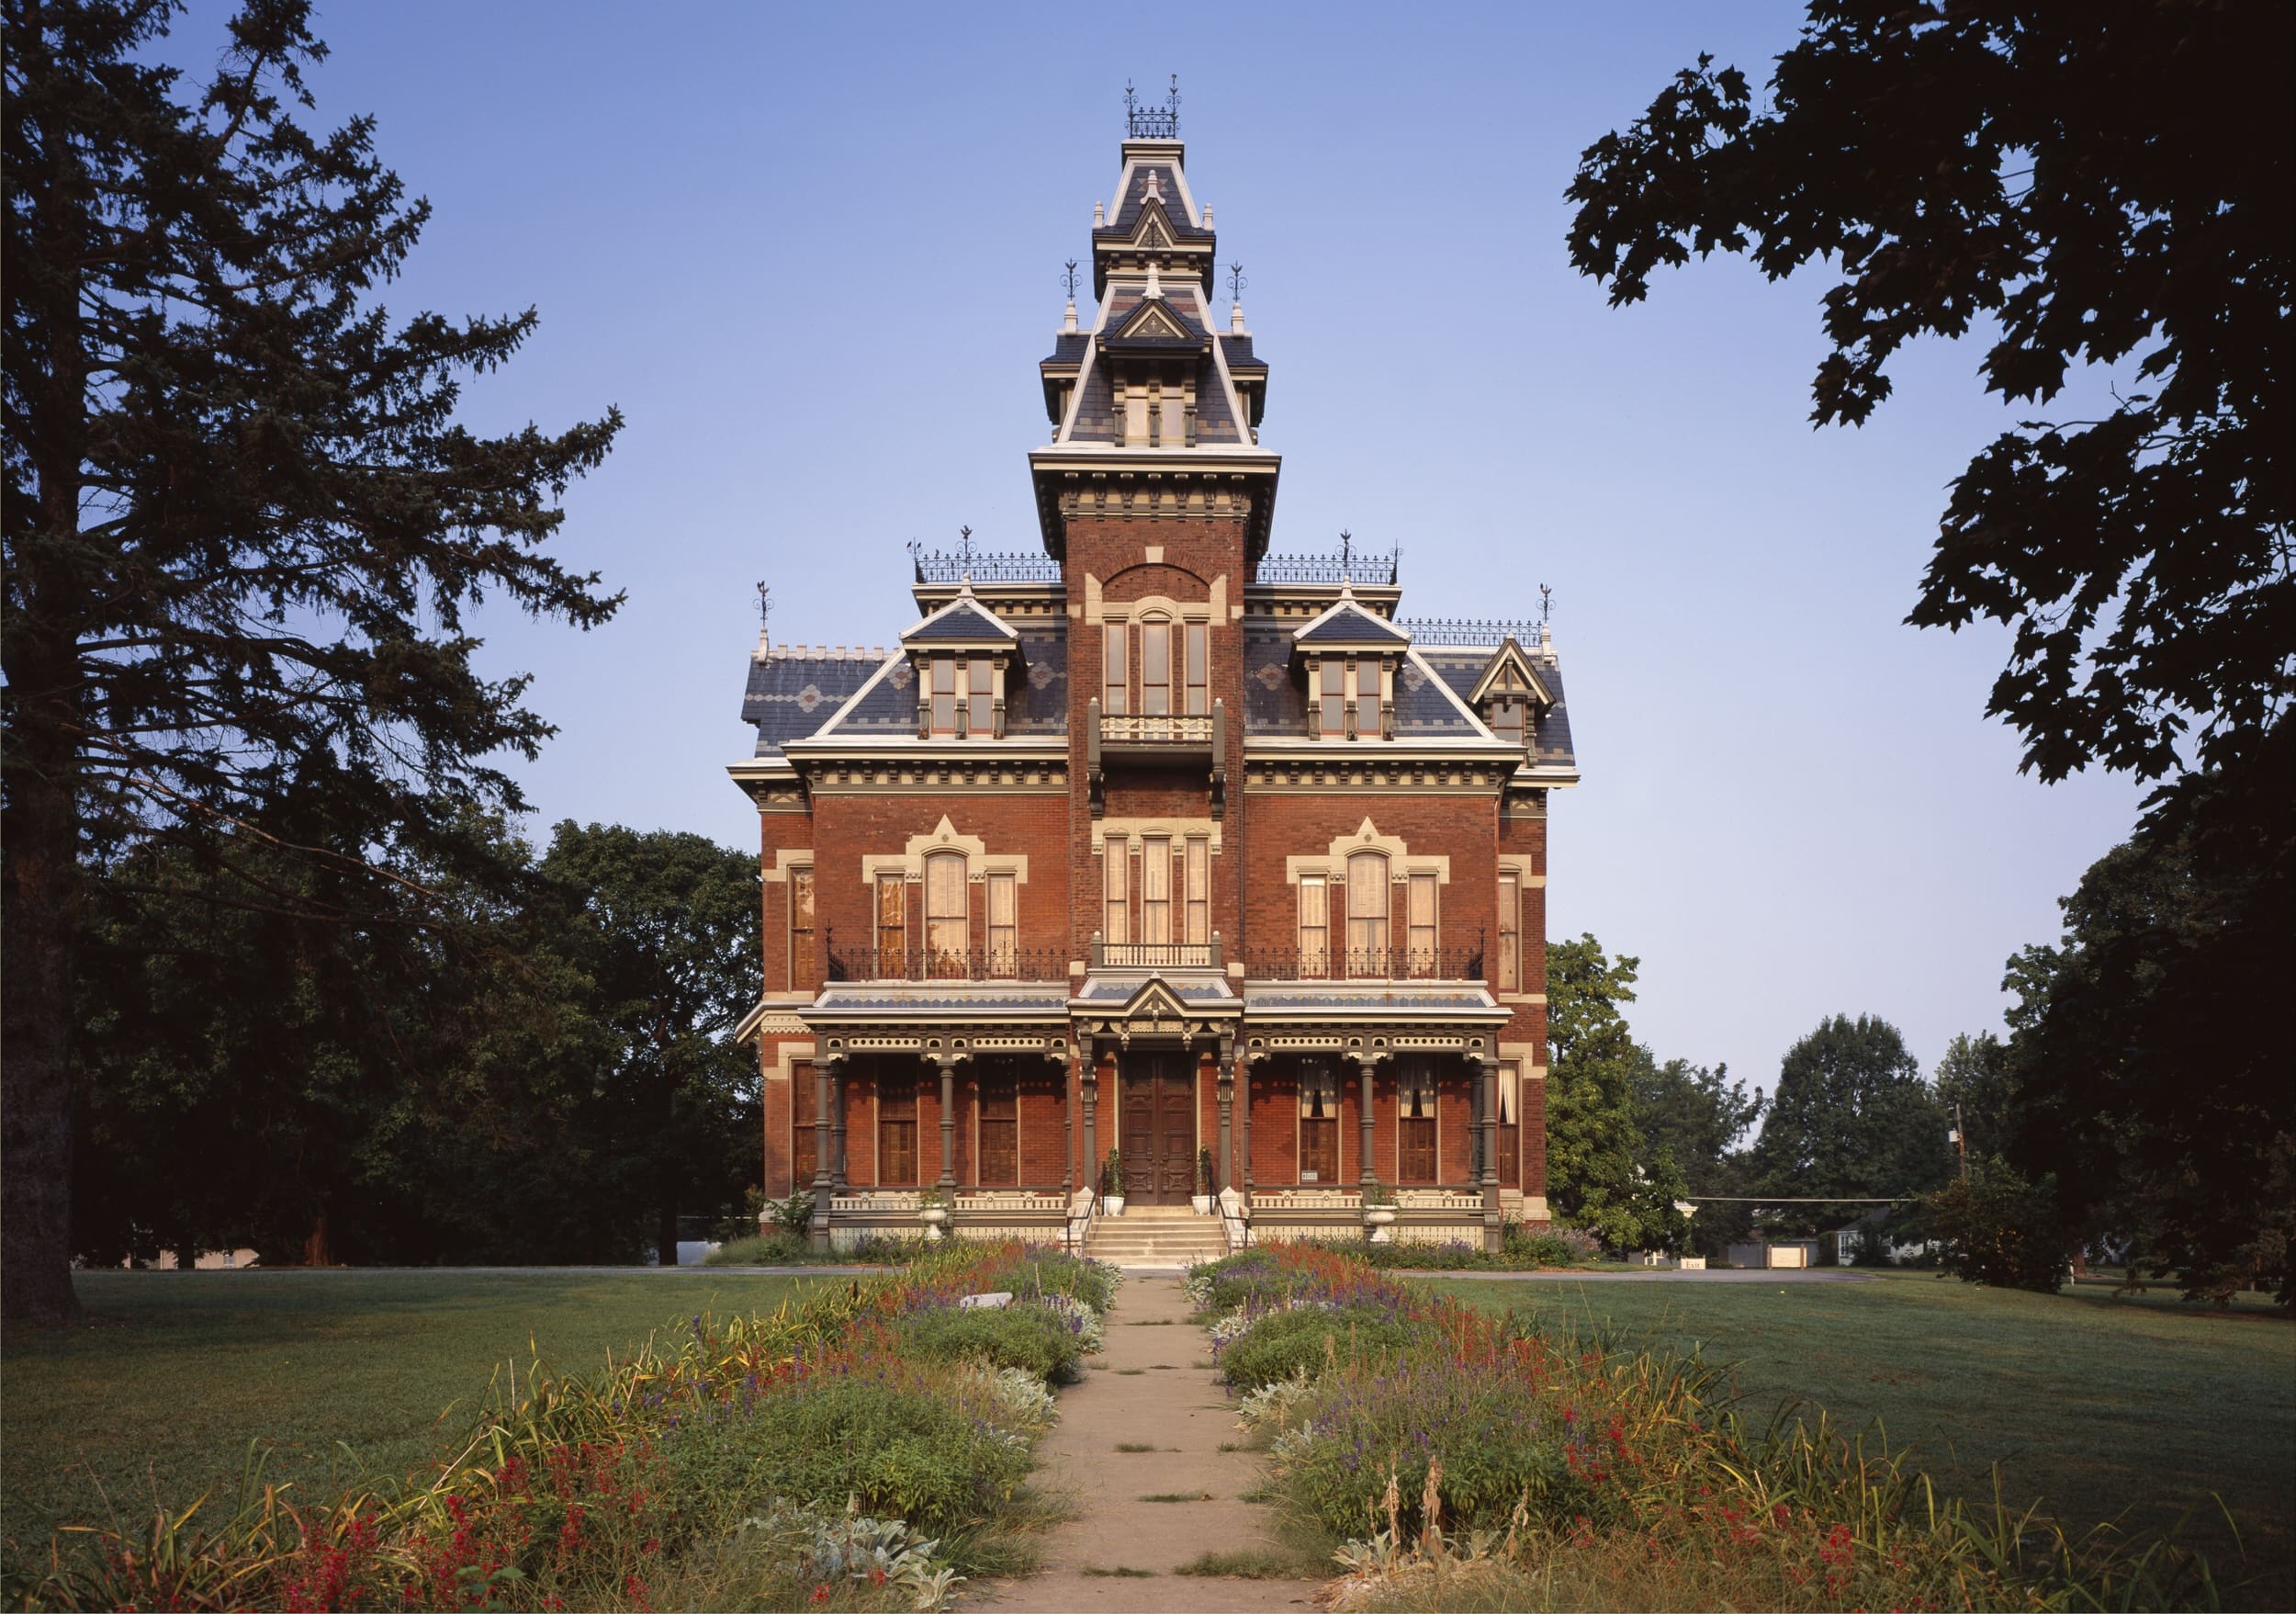 The Harvey M. Vaile Mansion, built in Independence, Missouri in 1881.